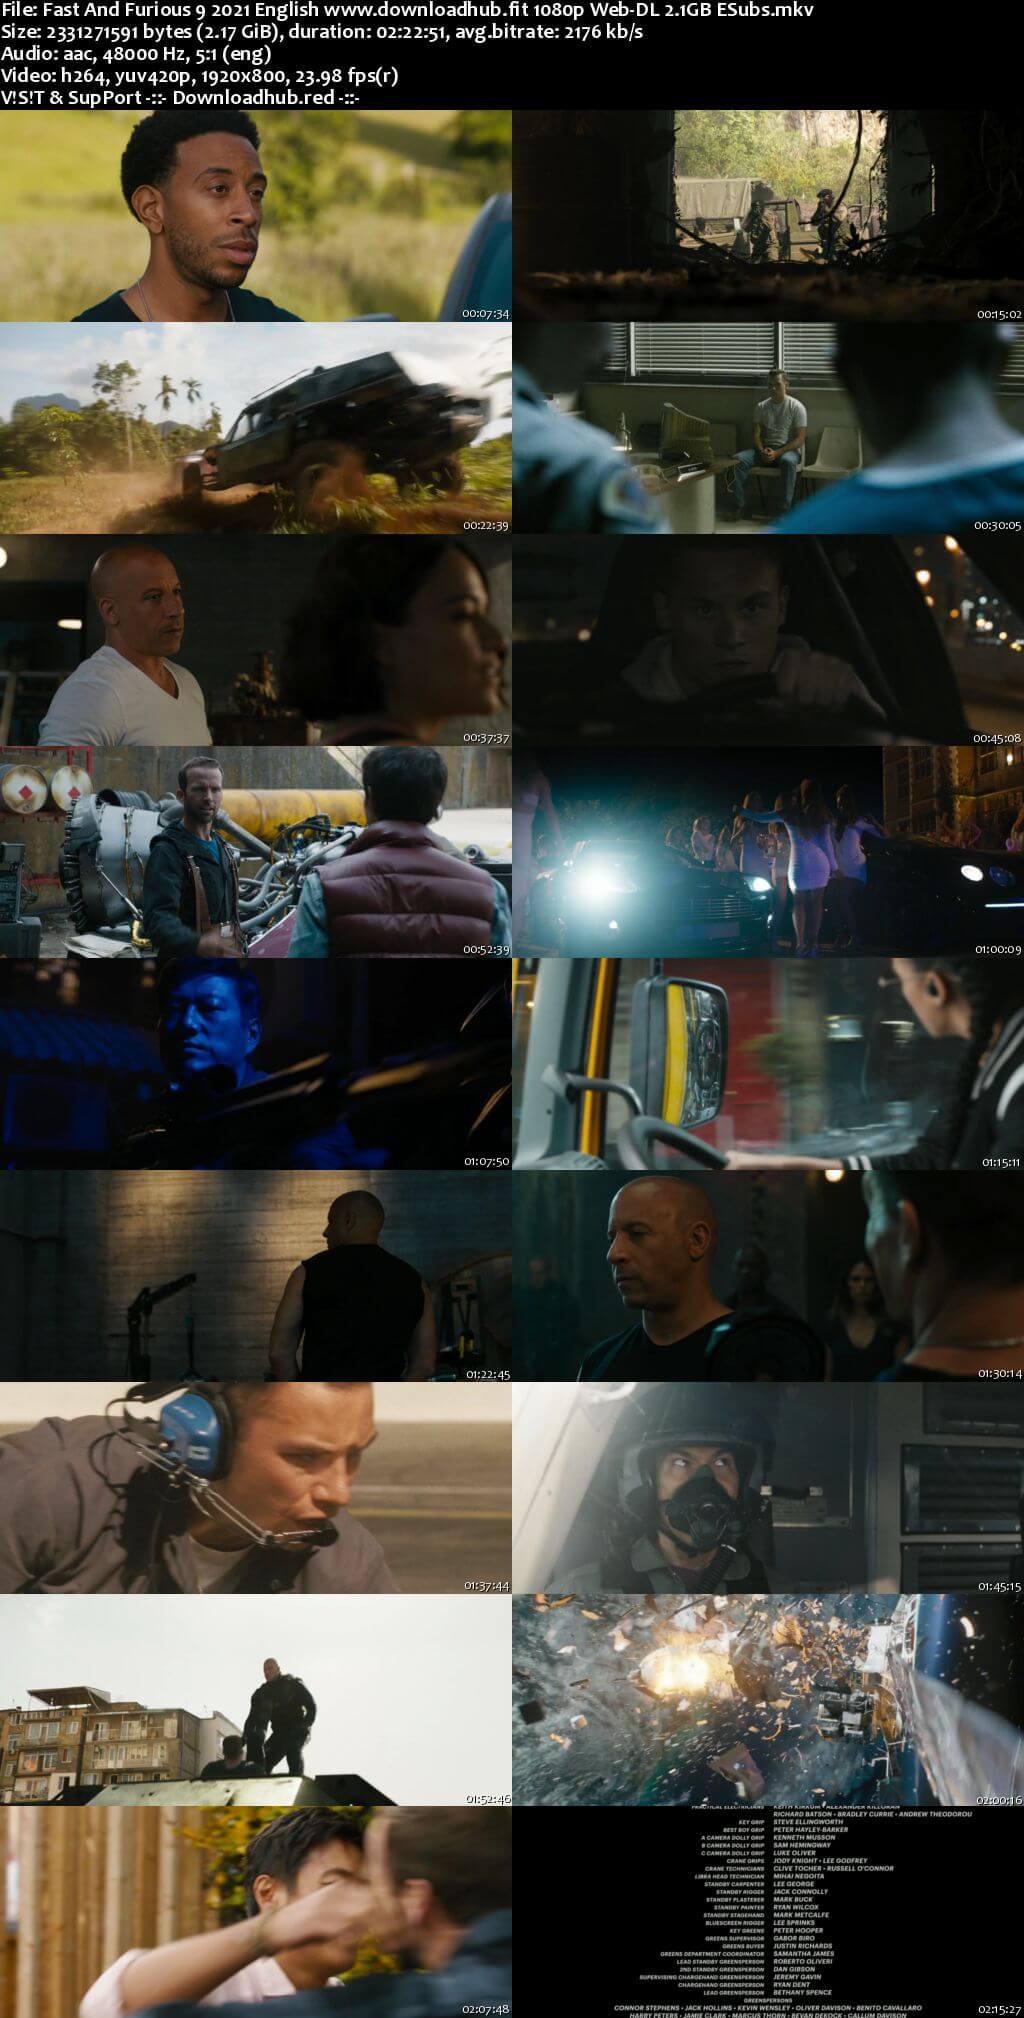 Fast And Furious 9 2021 English 1080p Web-DL 2.1GB ESubs